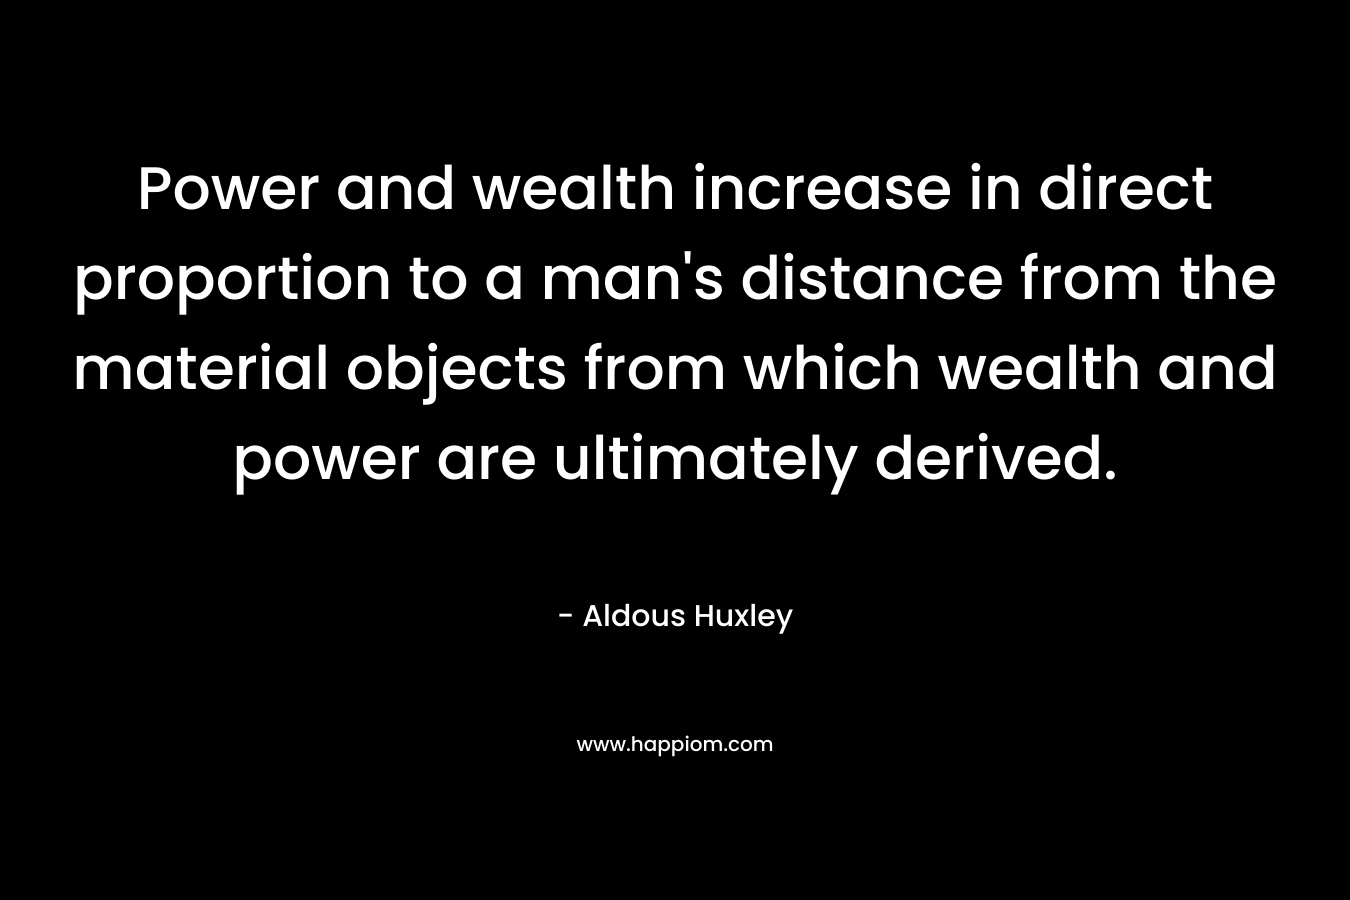 Power and wealth increase in direct proportion to a man's distance from the material objects from which wealth and power are ultimately derived.